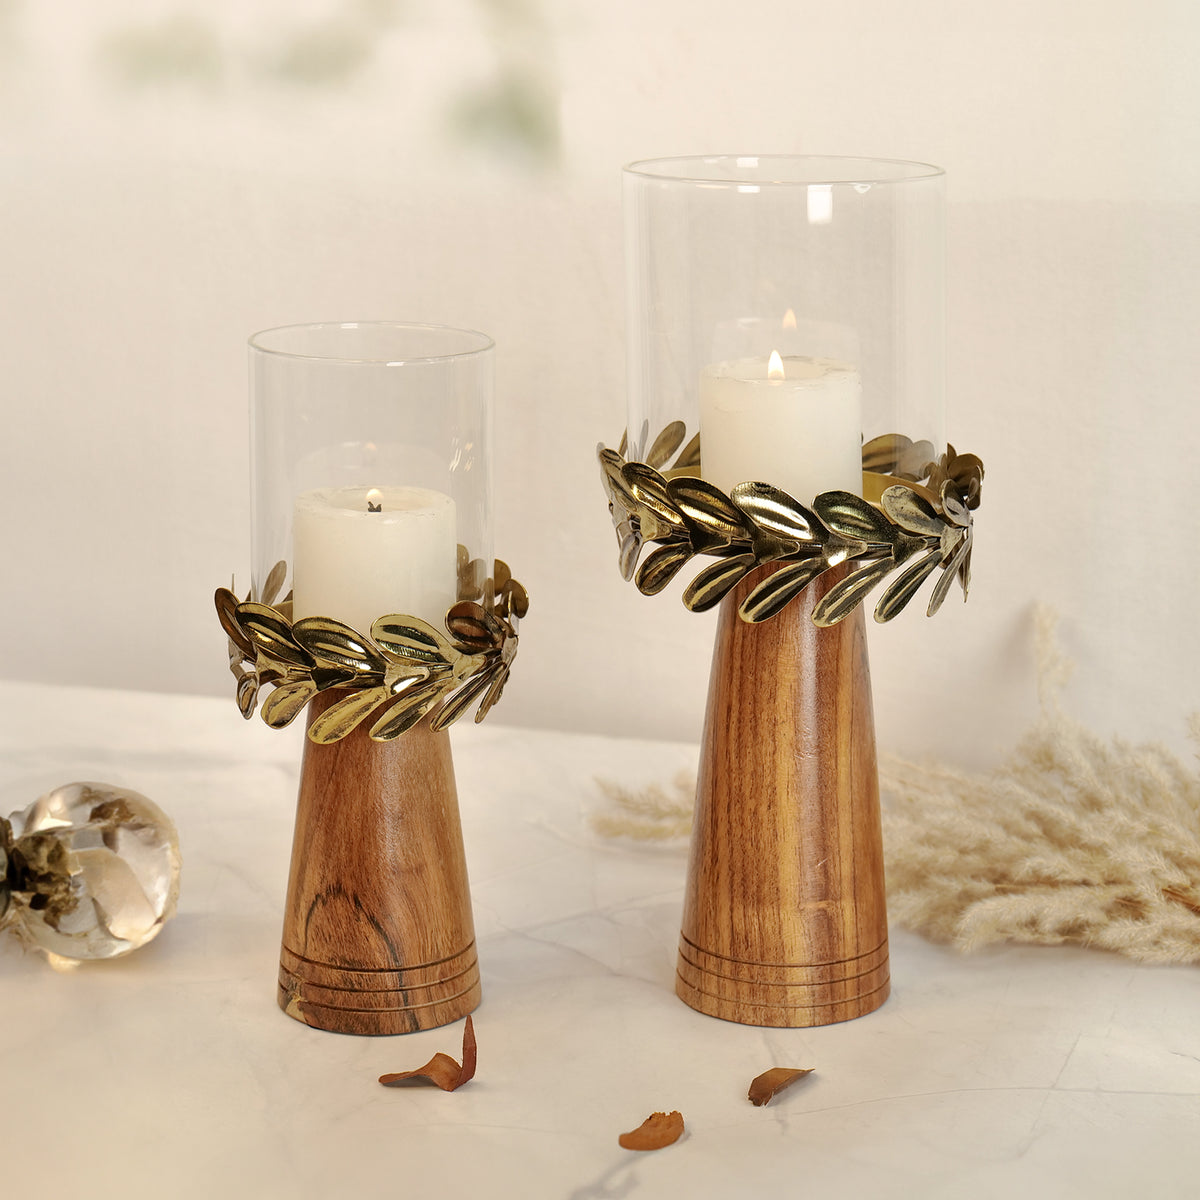 Candle Holder for Home Decor with Wood and Glass - Set of 2